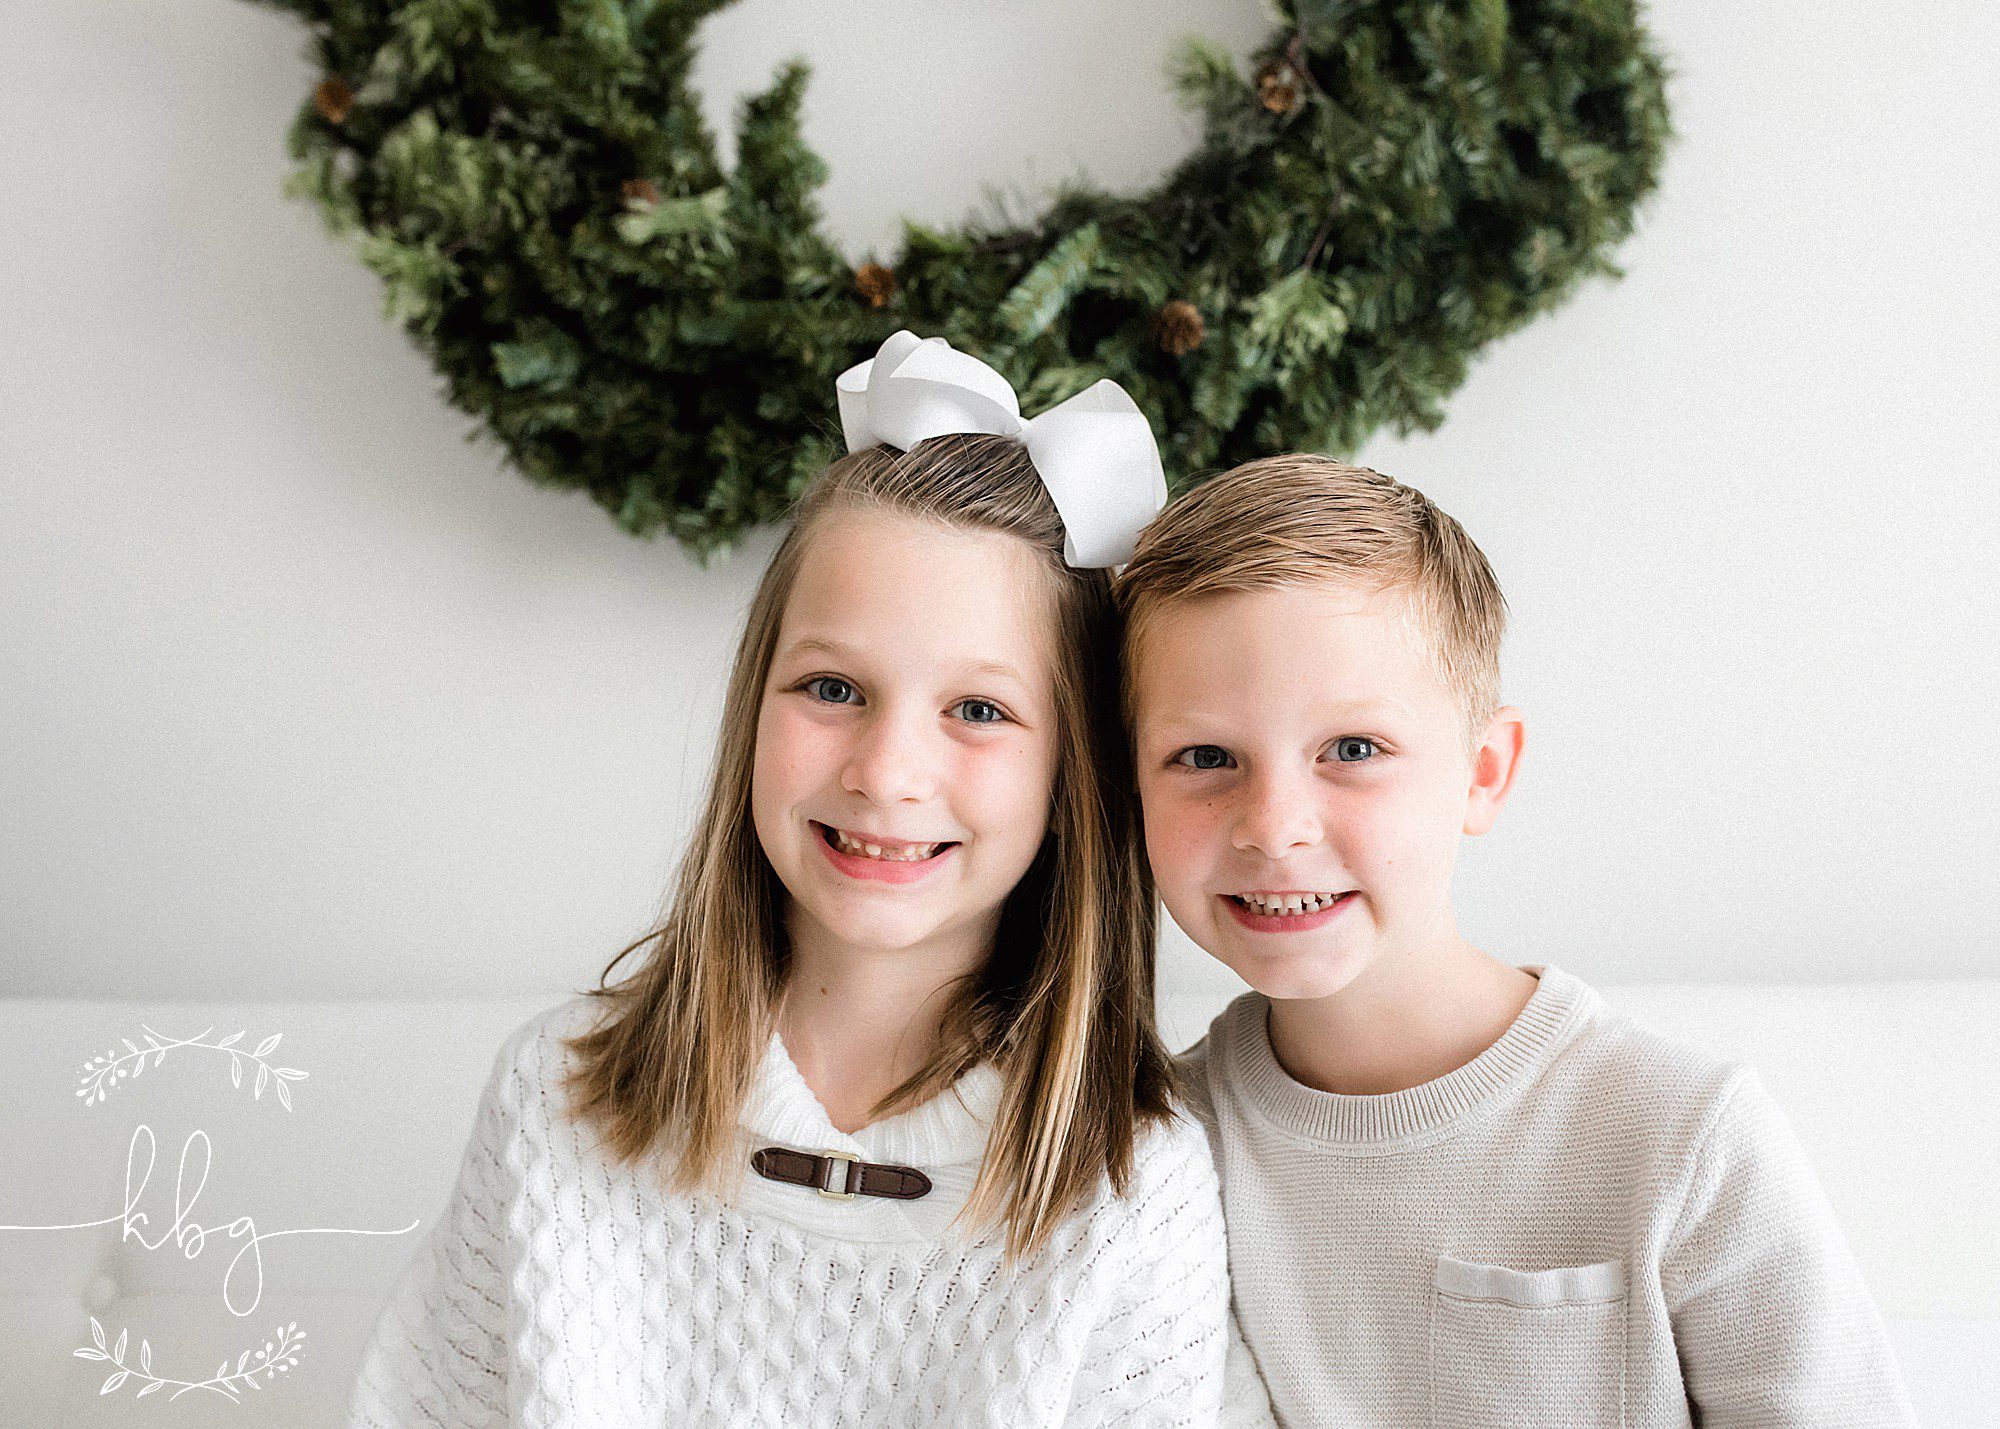 siblings posing on couch by wreath - atlanta child photographer 